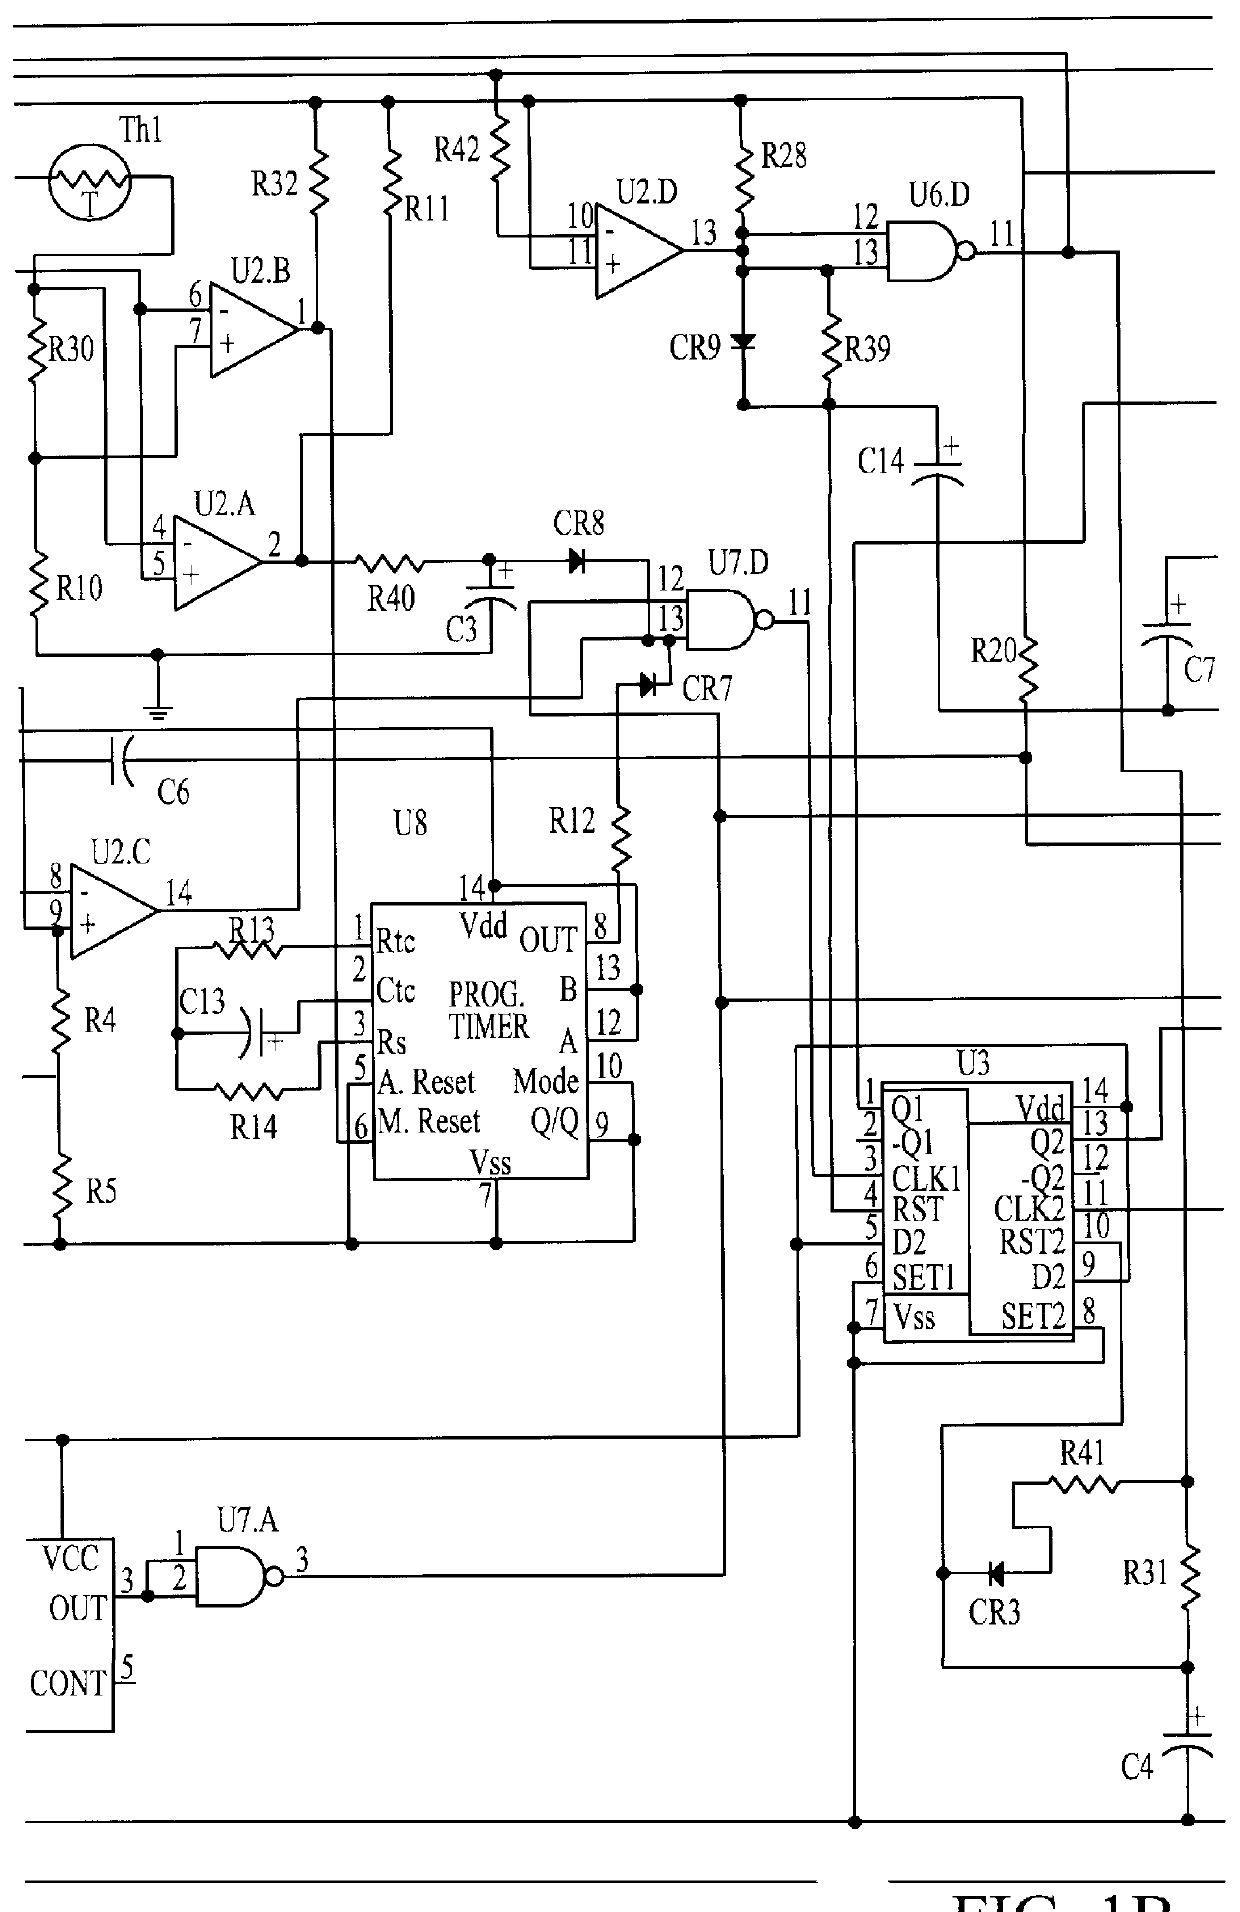 Resetable battery drain limitation circuit with complementary dual voltage setpoints